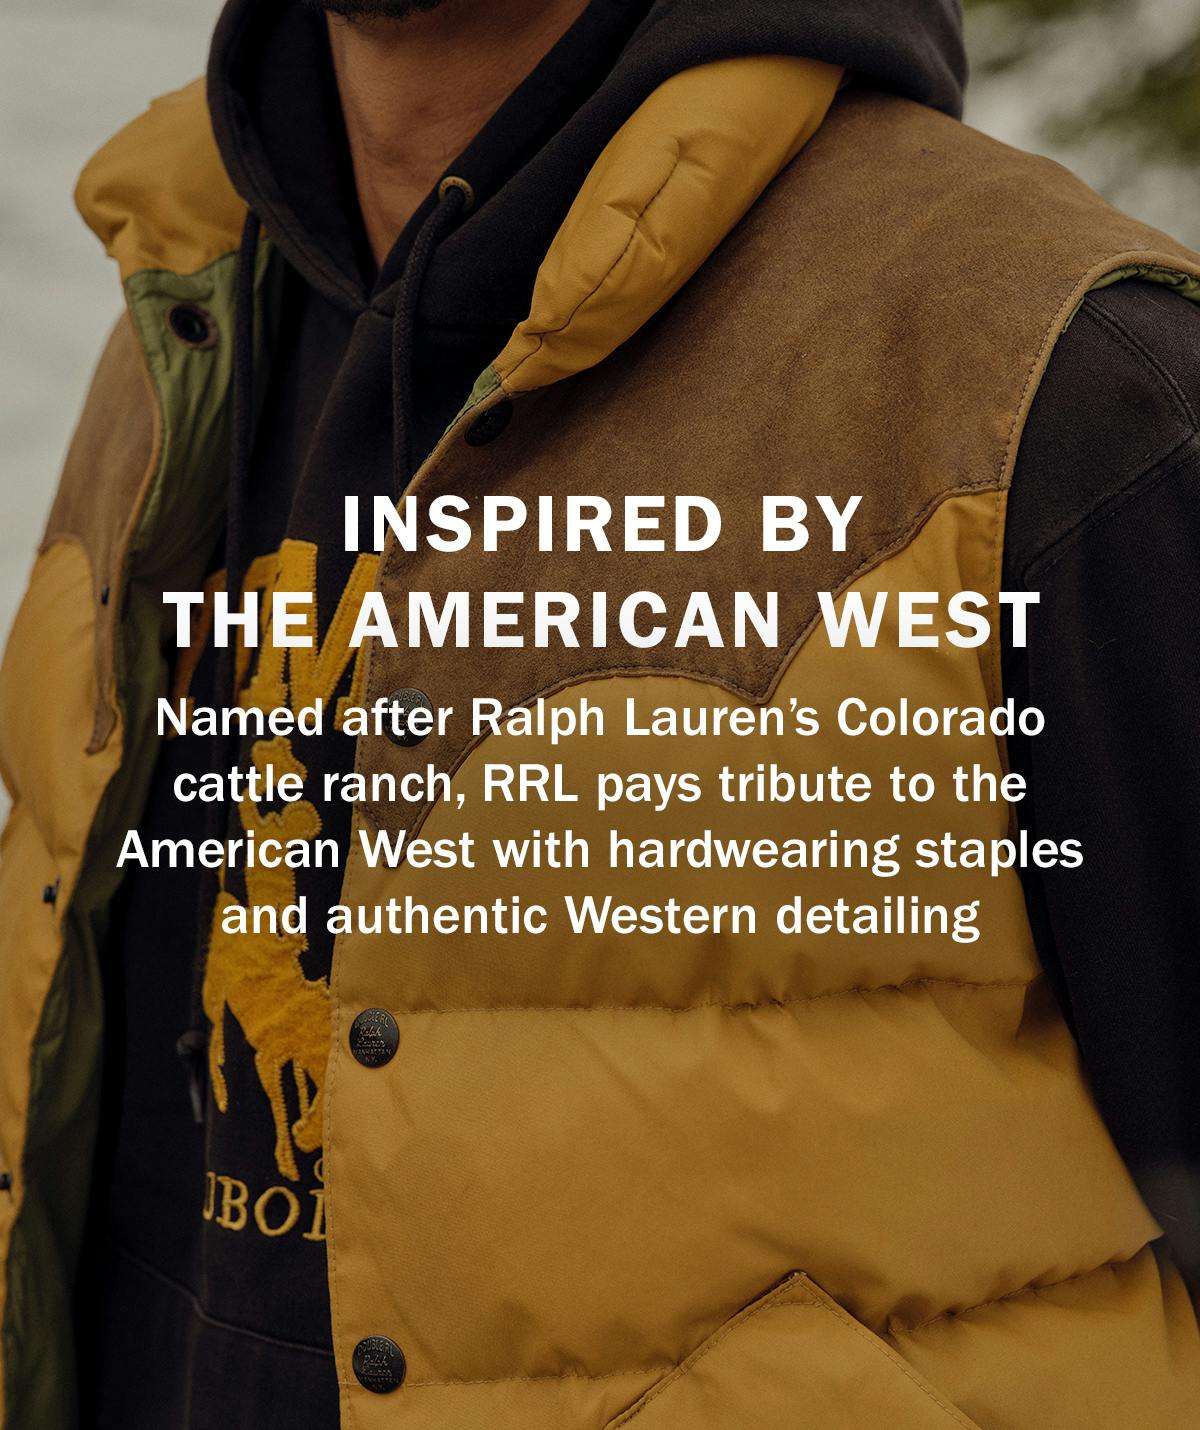 INSPIRED BY THE AMERICAN WEST